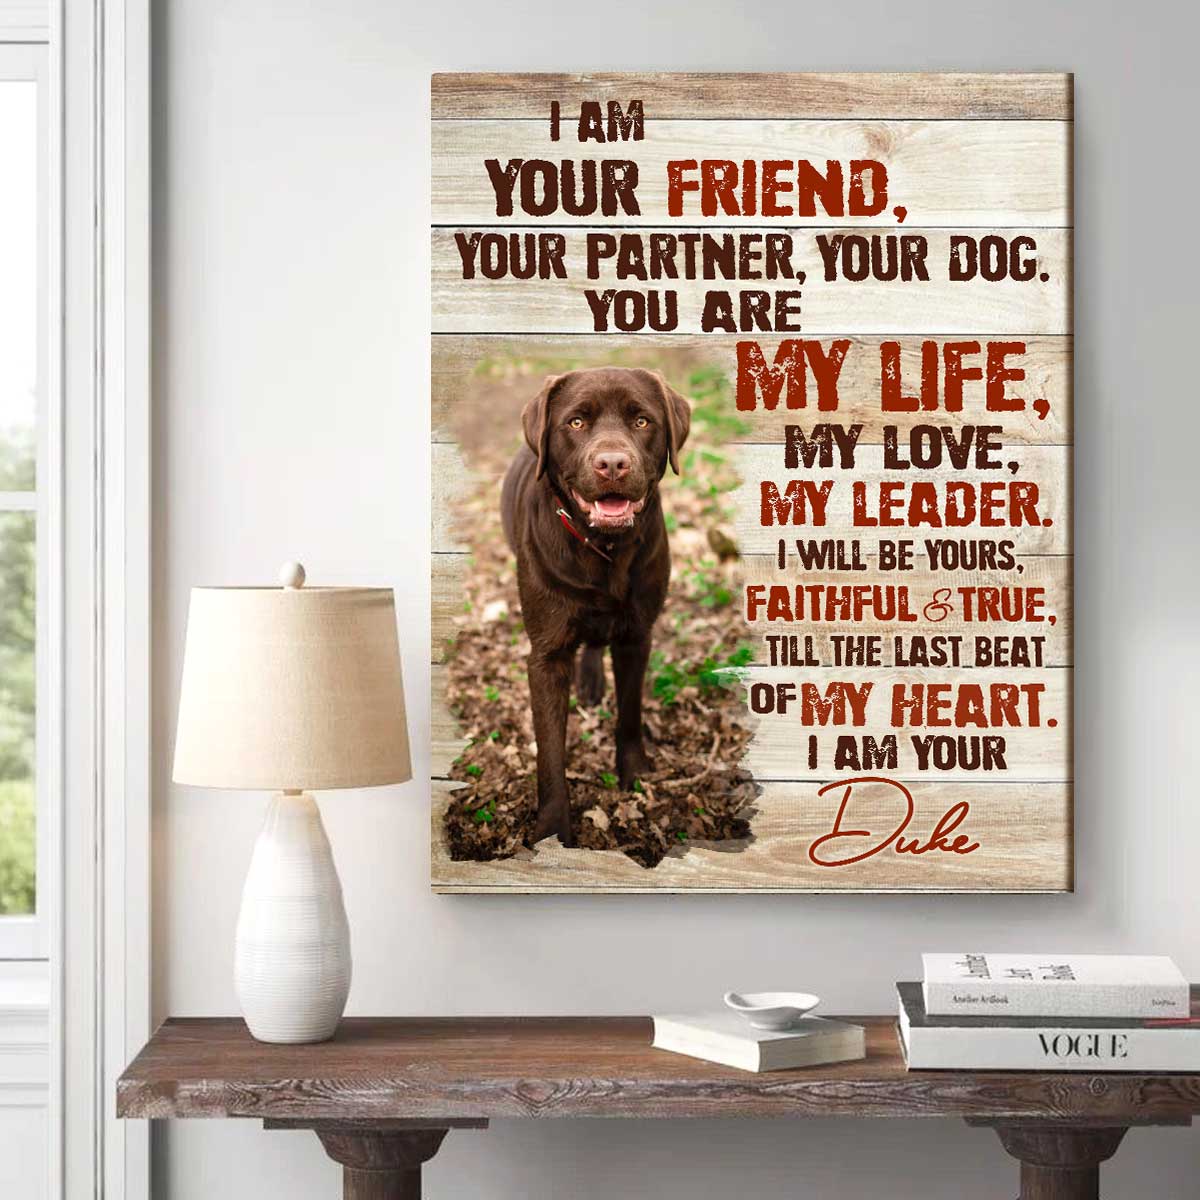 Christmas Gifts for Dog Lovers, Custom Pet Portrait, Dog Memorial Gifts, Dog Poster Gifts From the Dog